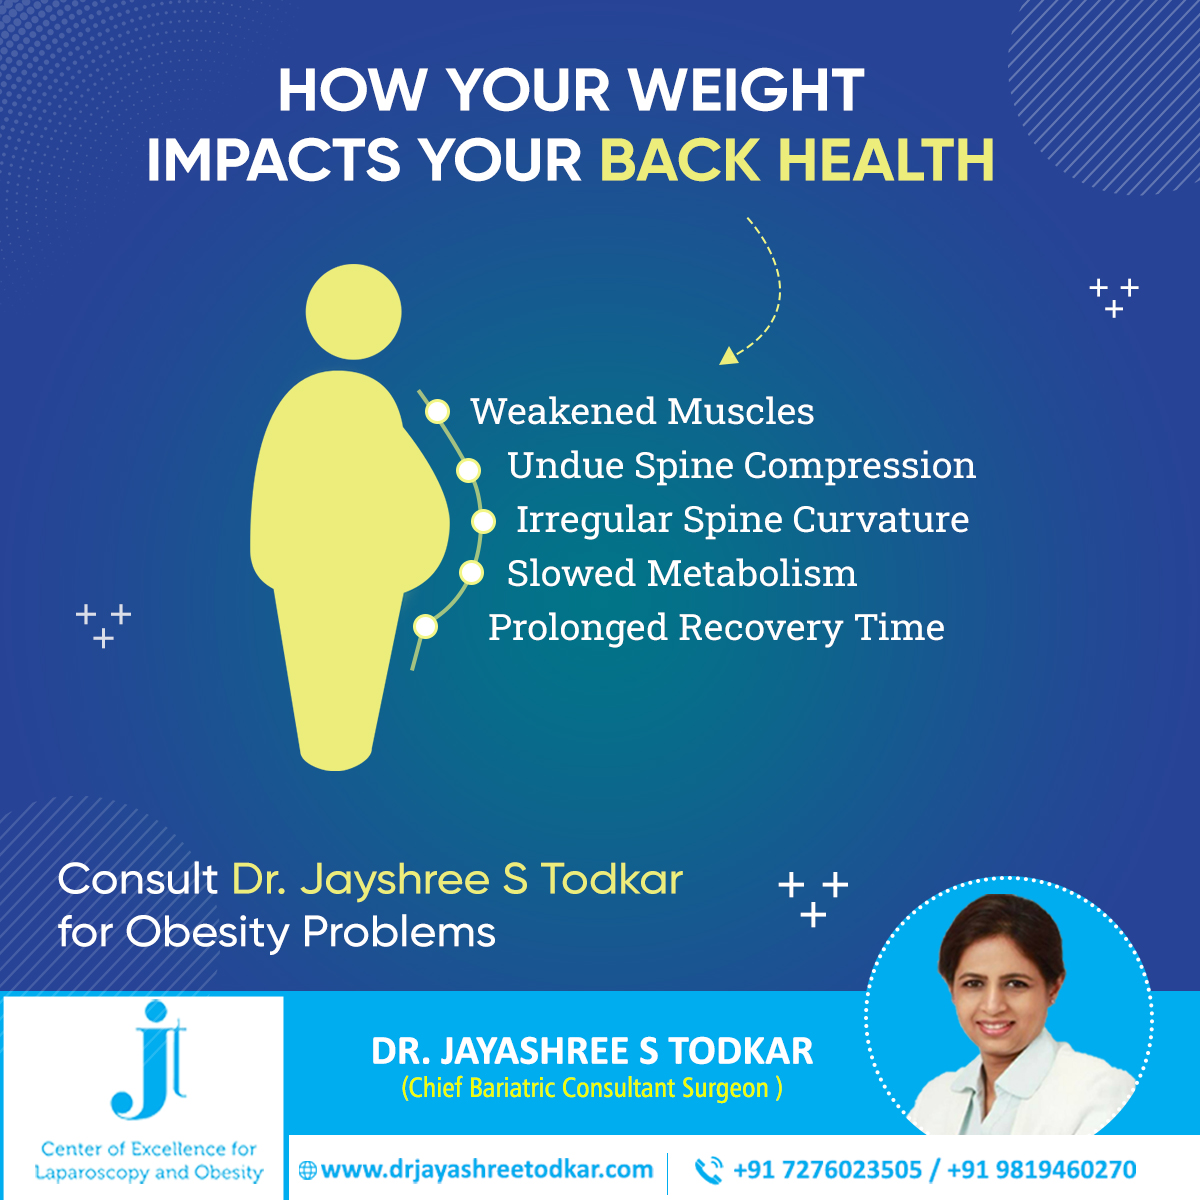 People with extra weight in their stomachs because the excess weight pulls the pelvis forward and strains the lower back, creating lower back pain. Women who are obese or who have a large waist size are particularly at risk for lower back pain.
#DrJayashreeTodkar